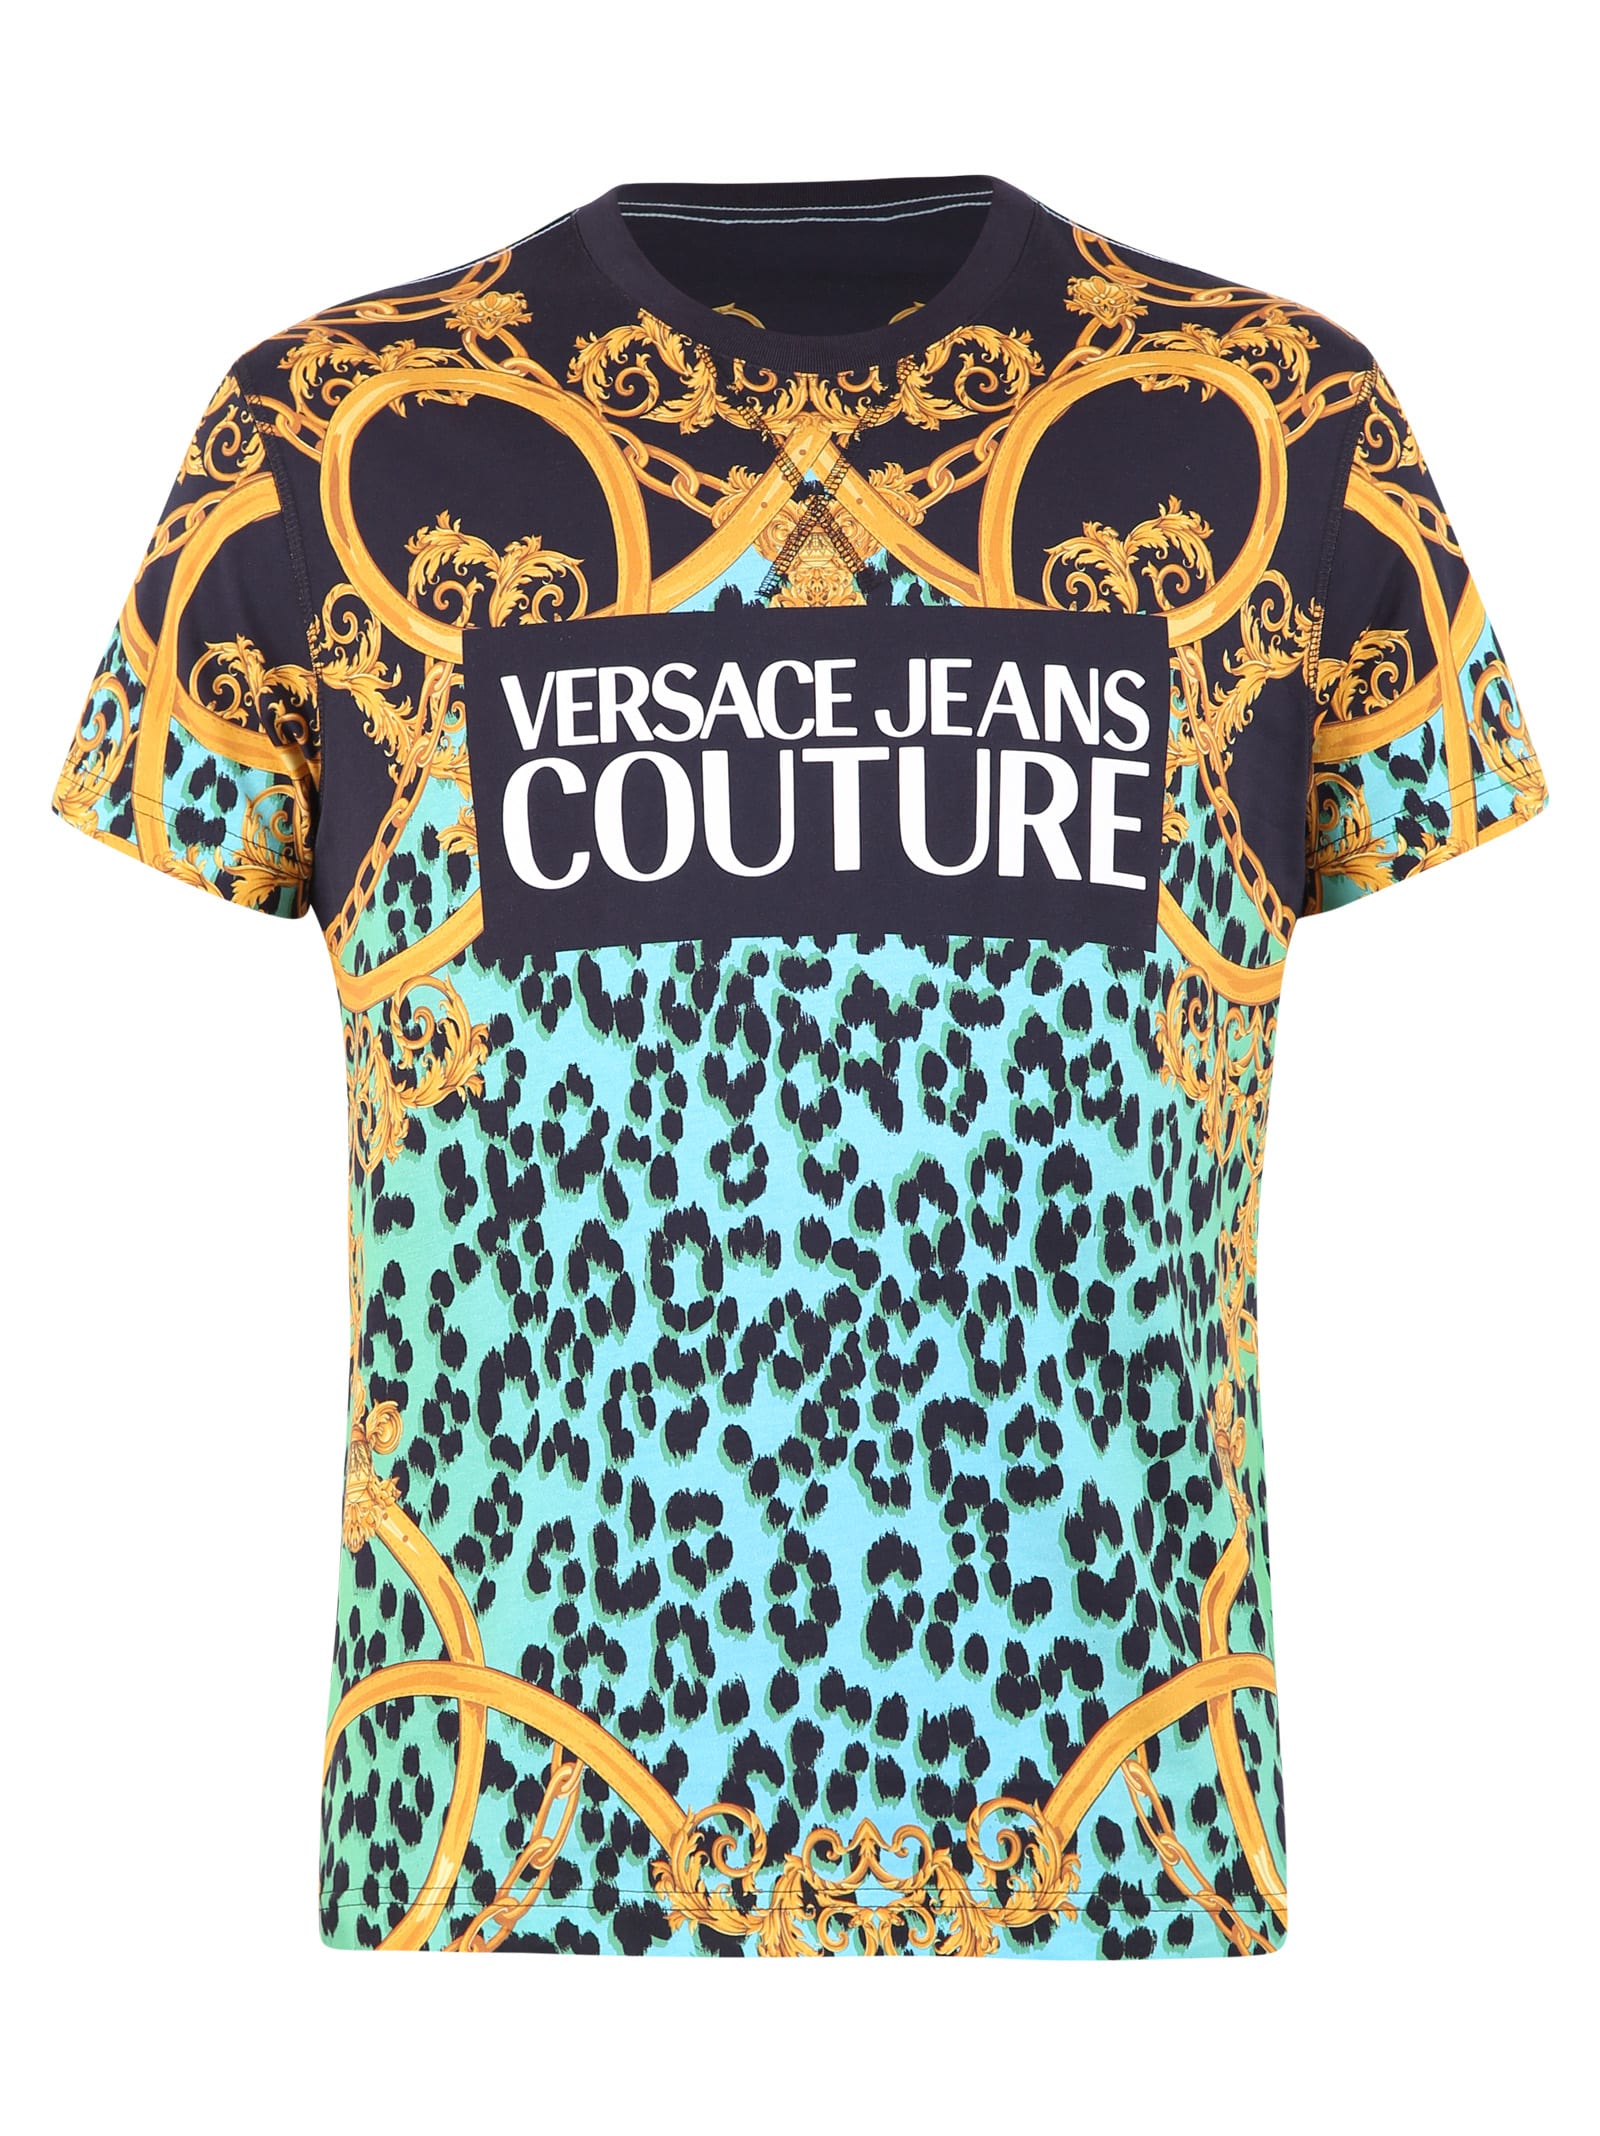 VERSACE JEANS COUTURE PRINTED T-SHIRT,11246377